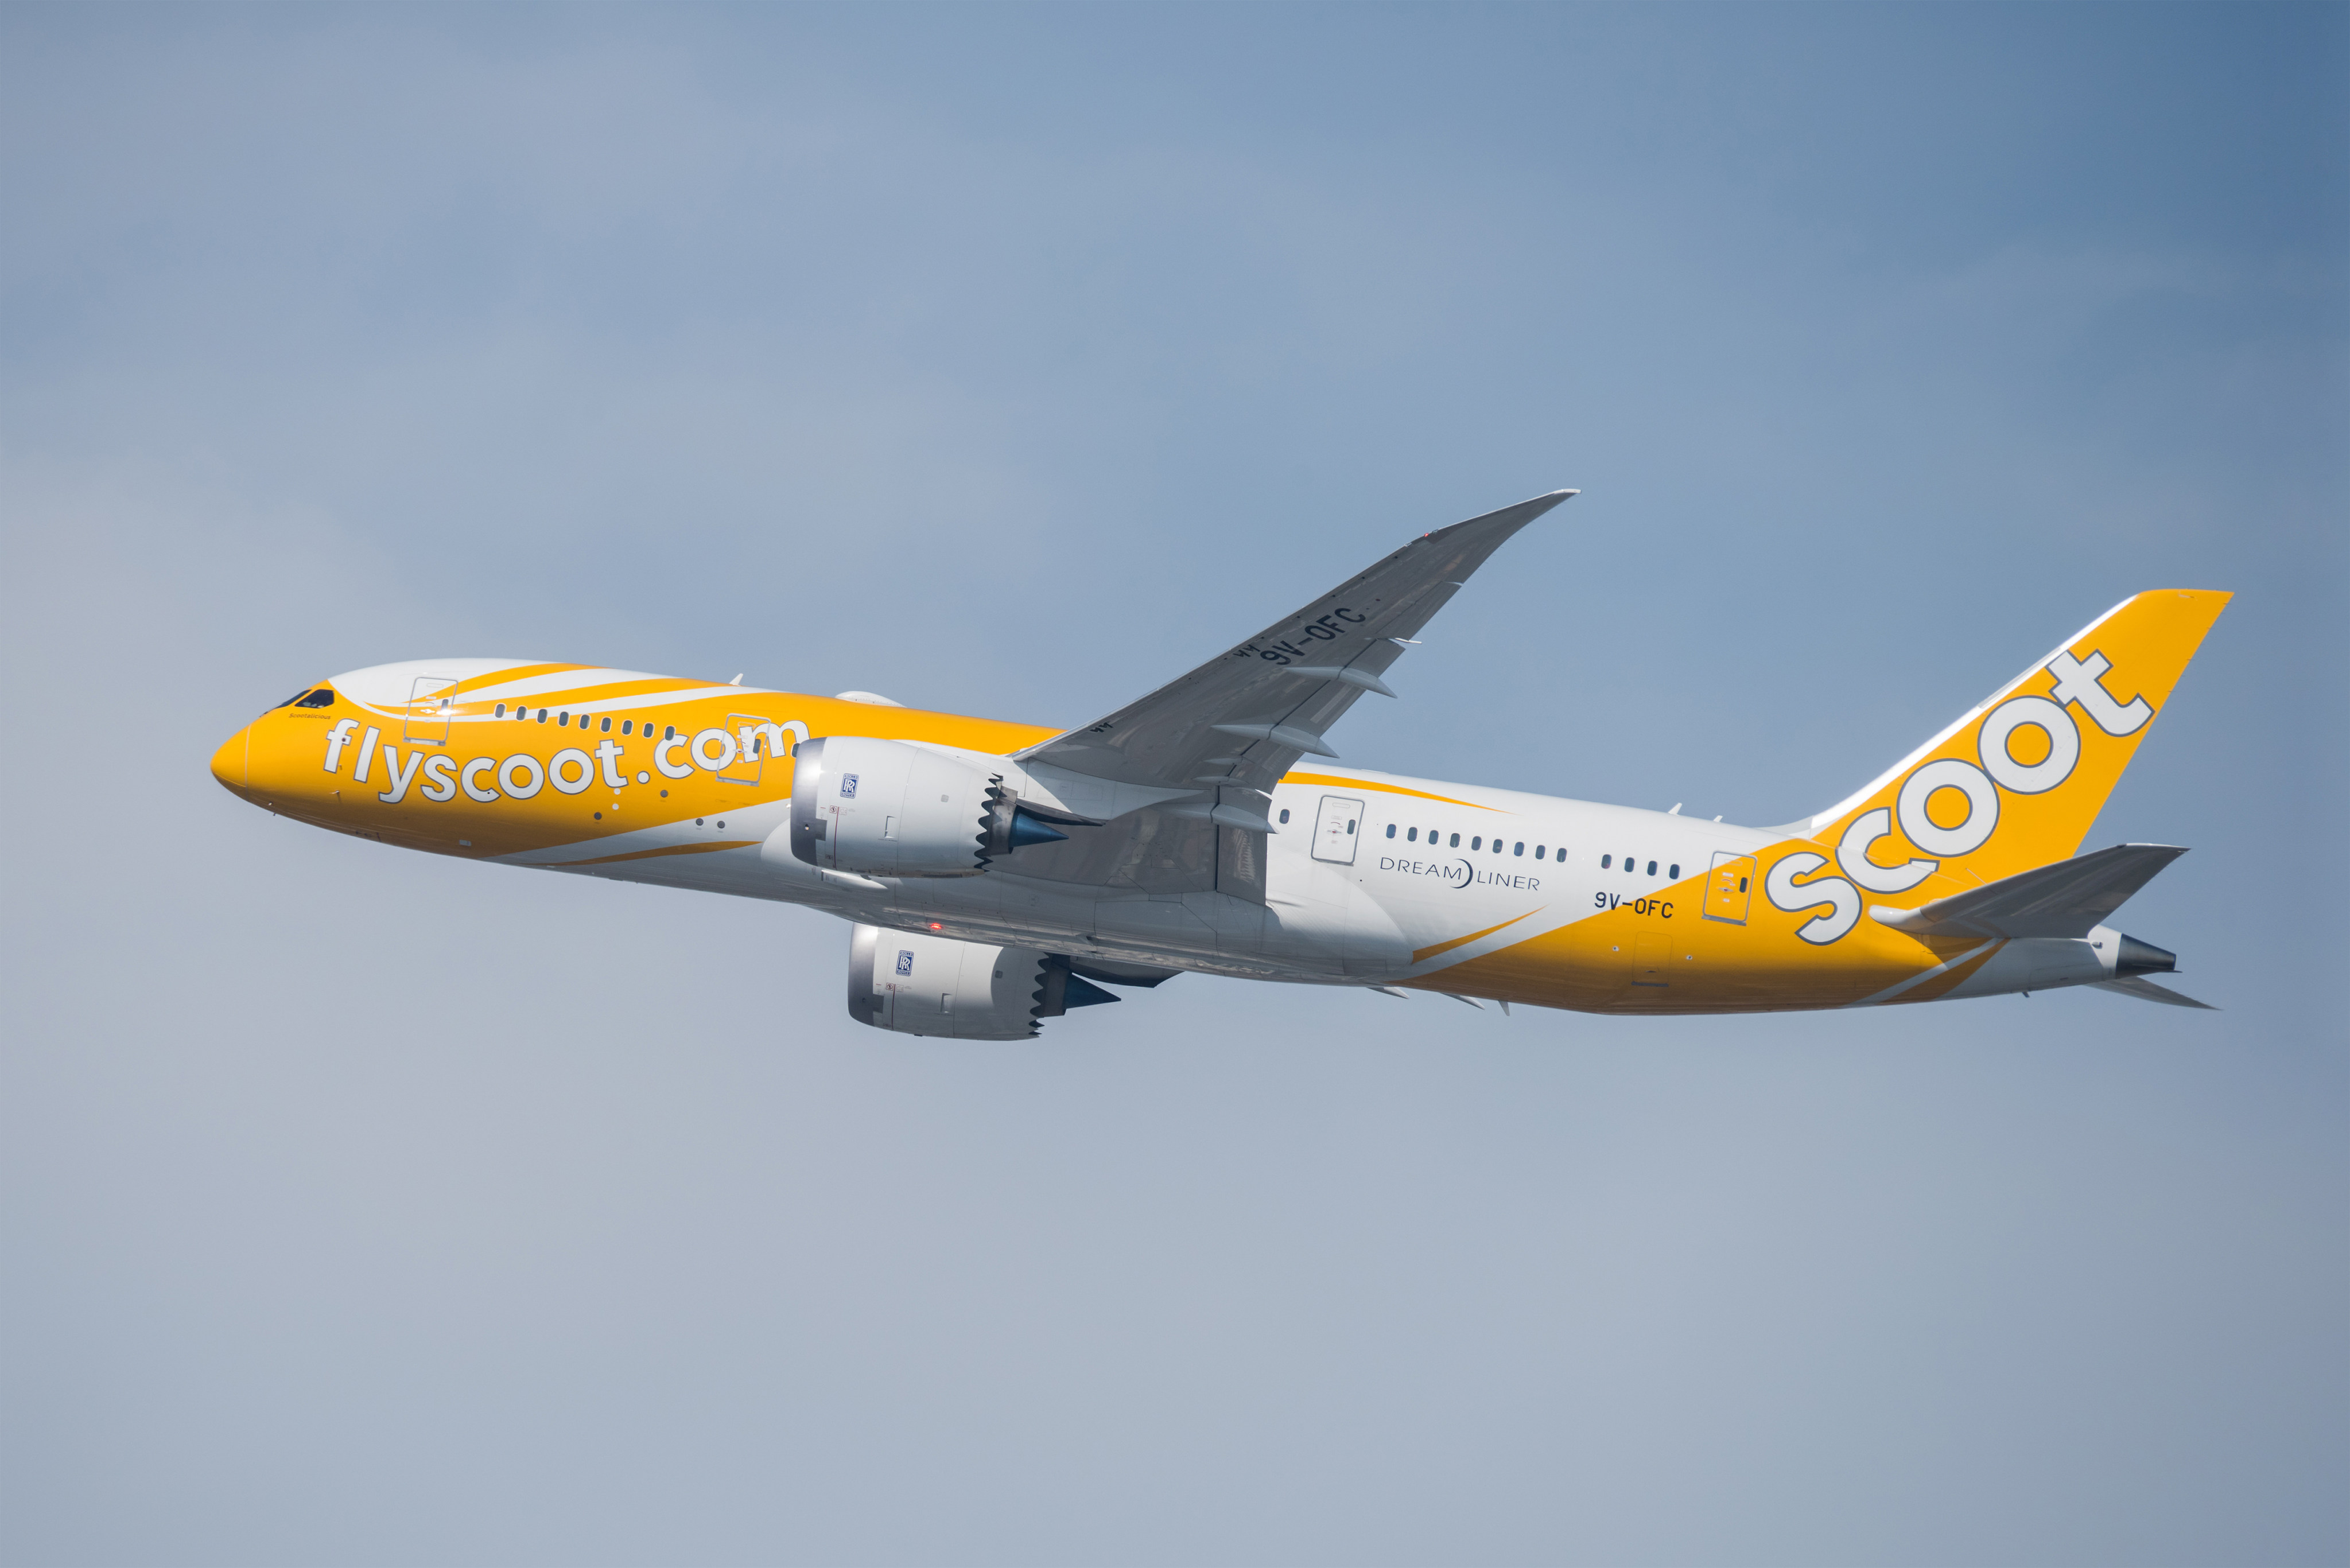 Scoot, a sub-brand of Singapore Airlines, is the only budget airline connecting Europe and East Asia. Photo: Shutterstock